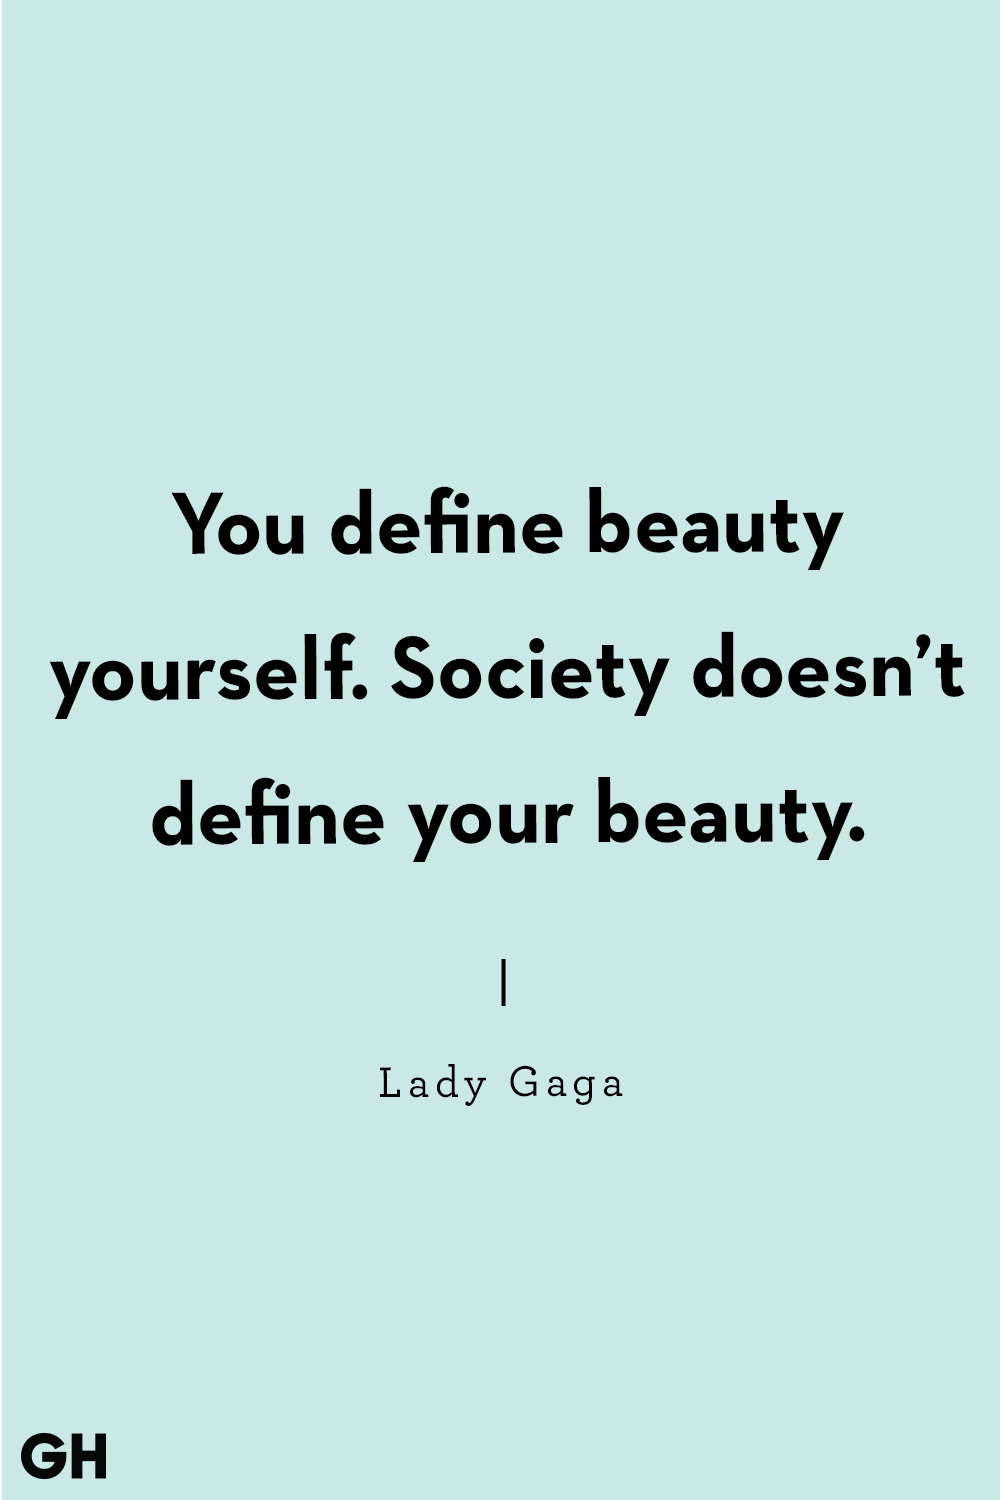 50 Best Body Positivity Quotes and Empowering Body Image Sayings